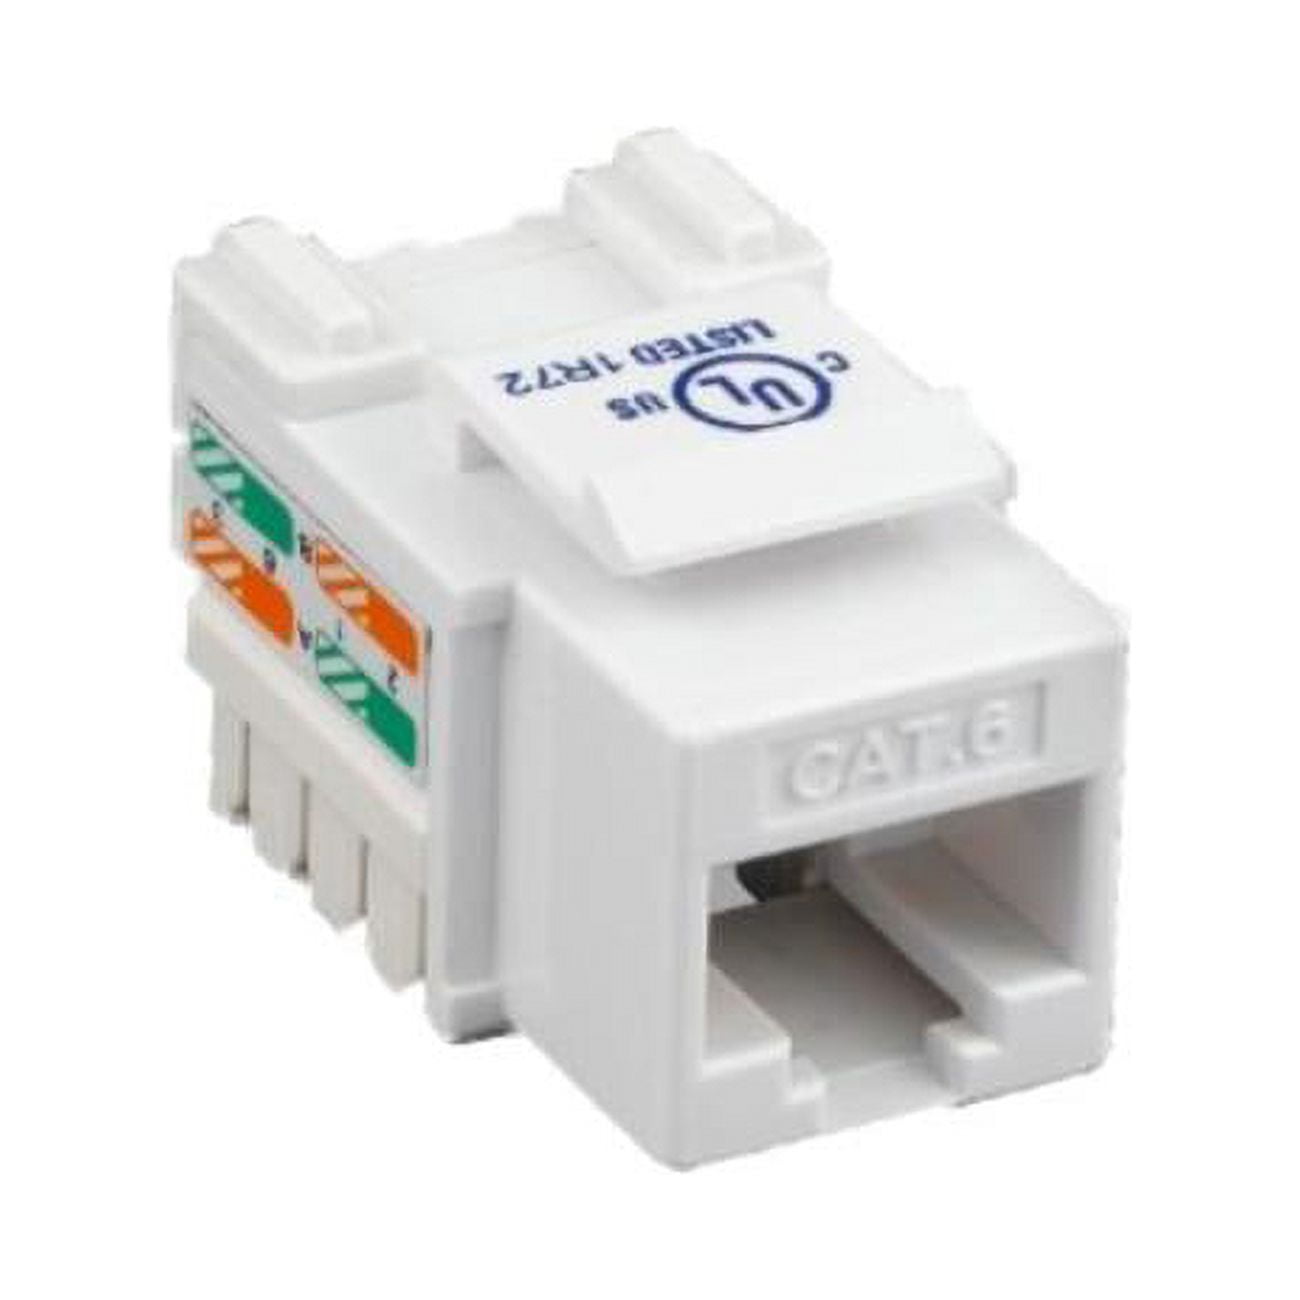 Picture of Cable Wholesale 326-121WH Cat6 Keystone Jack, White, RJ45 Female to 110 Punch Down